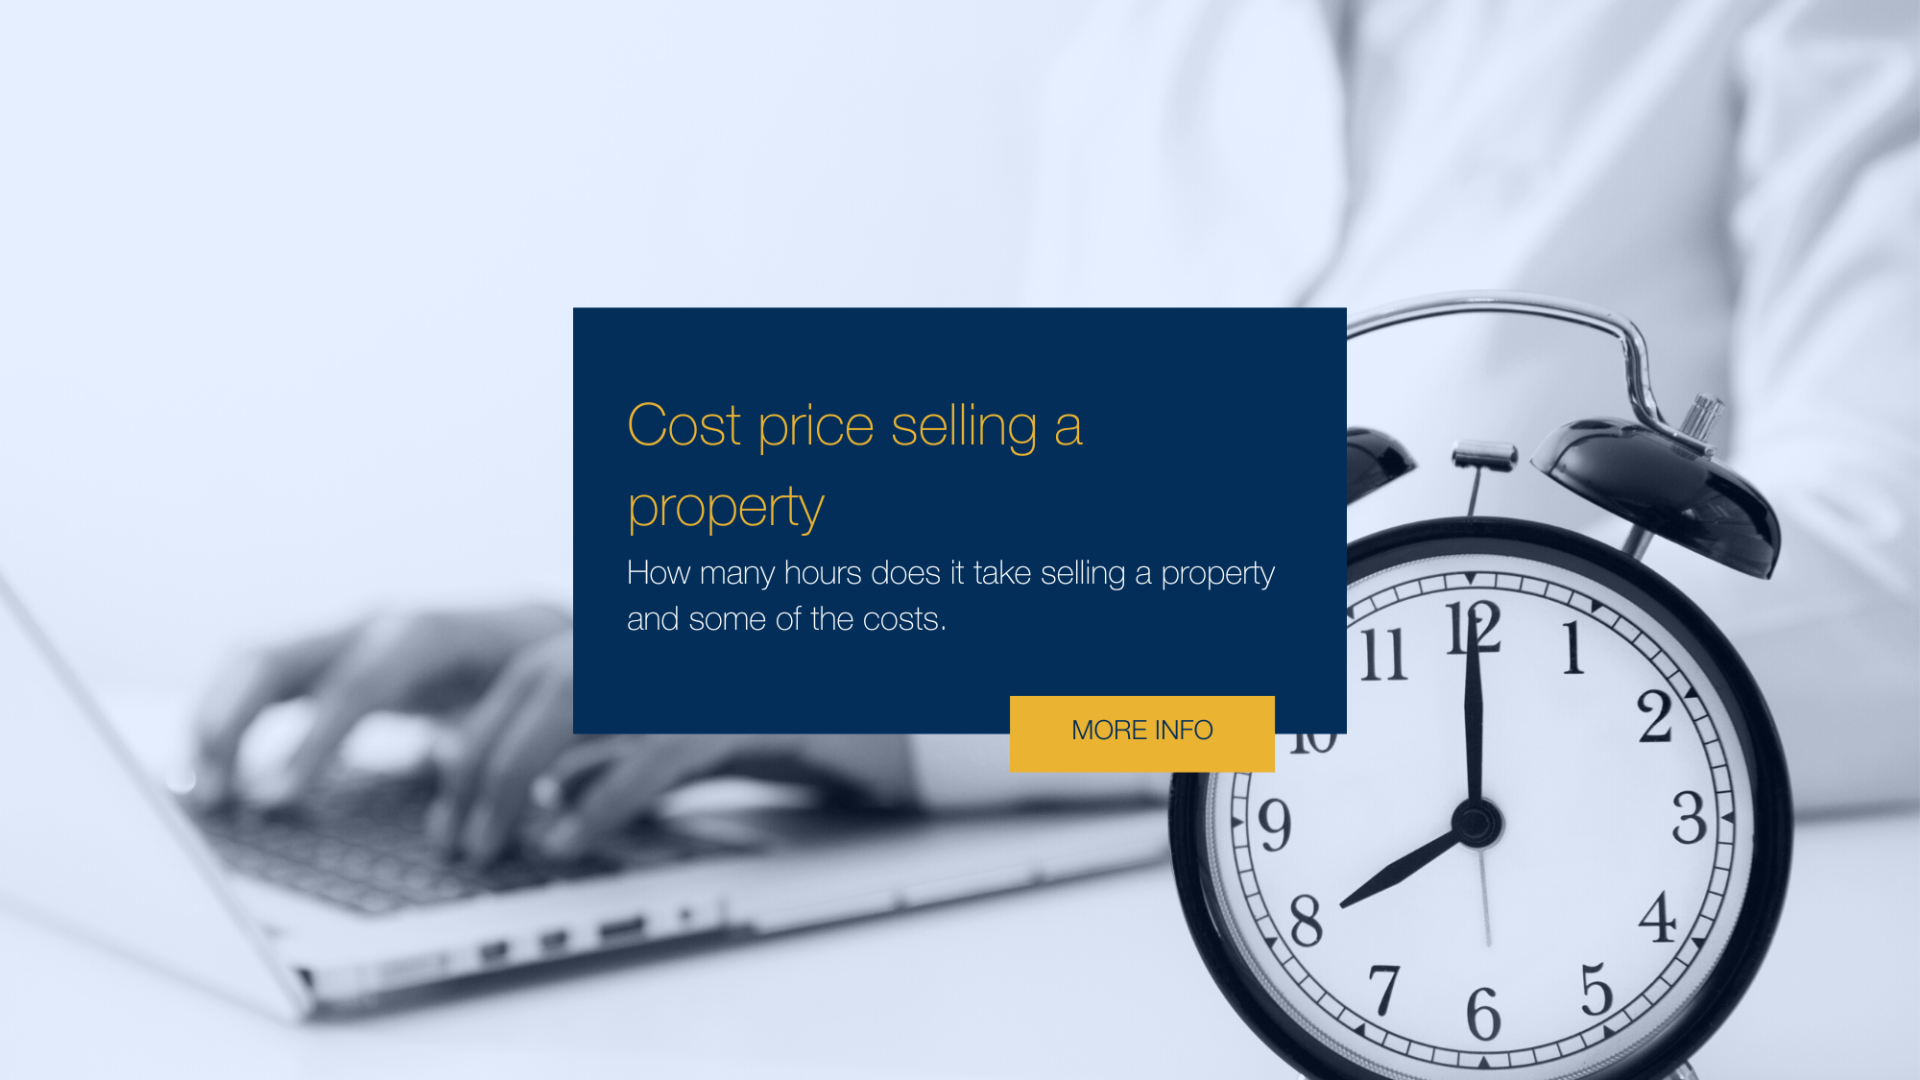 Cost price selling a property